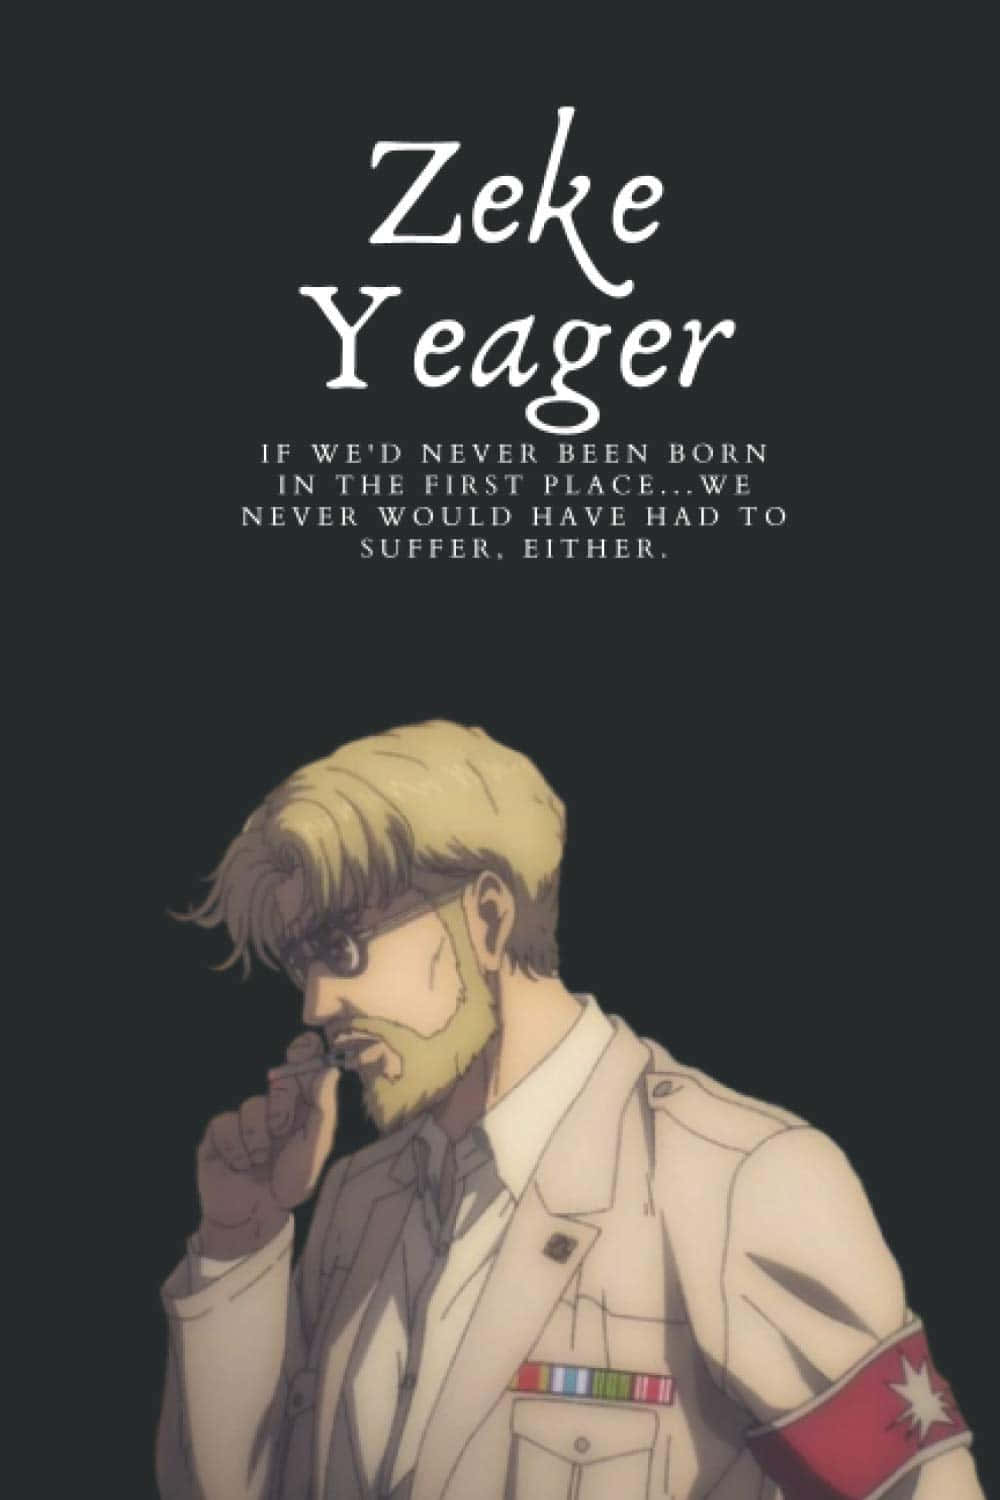 Zeke Yeager, a freedom fighter in the anime Attack on Titan Wallpaper